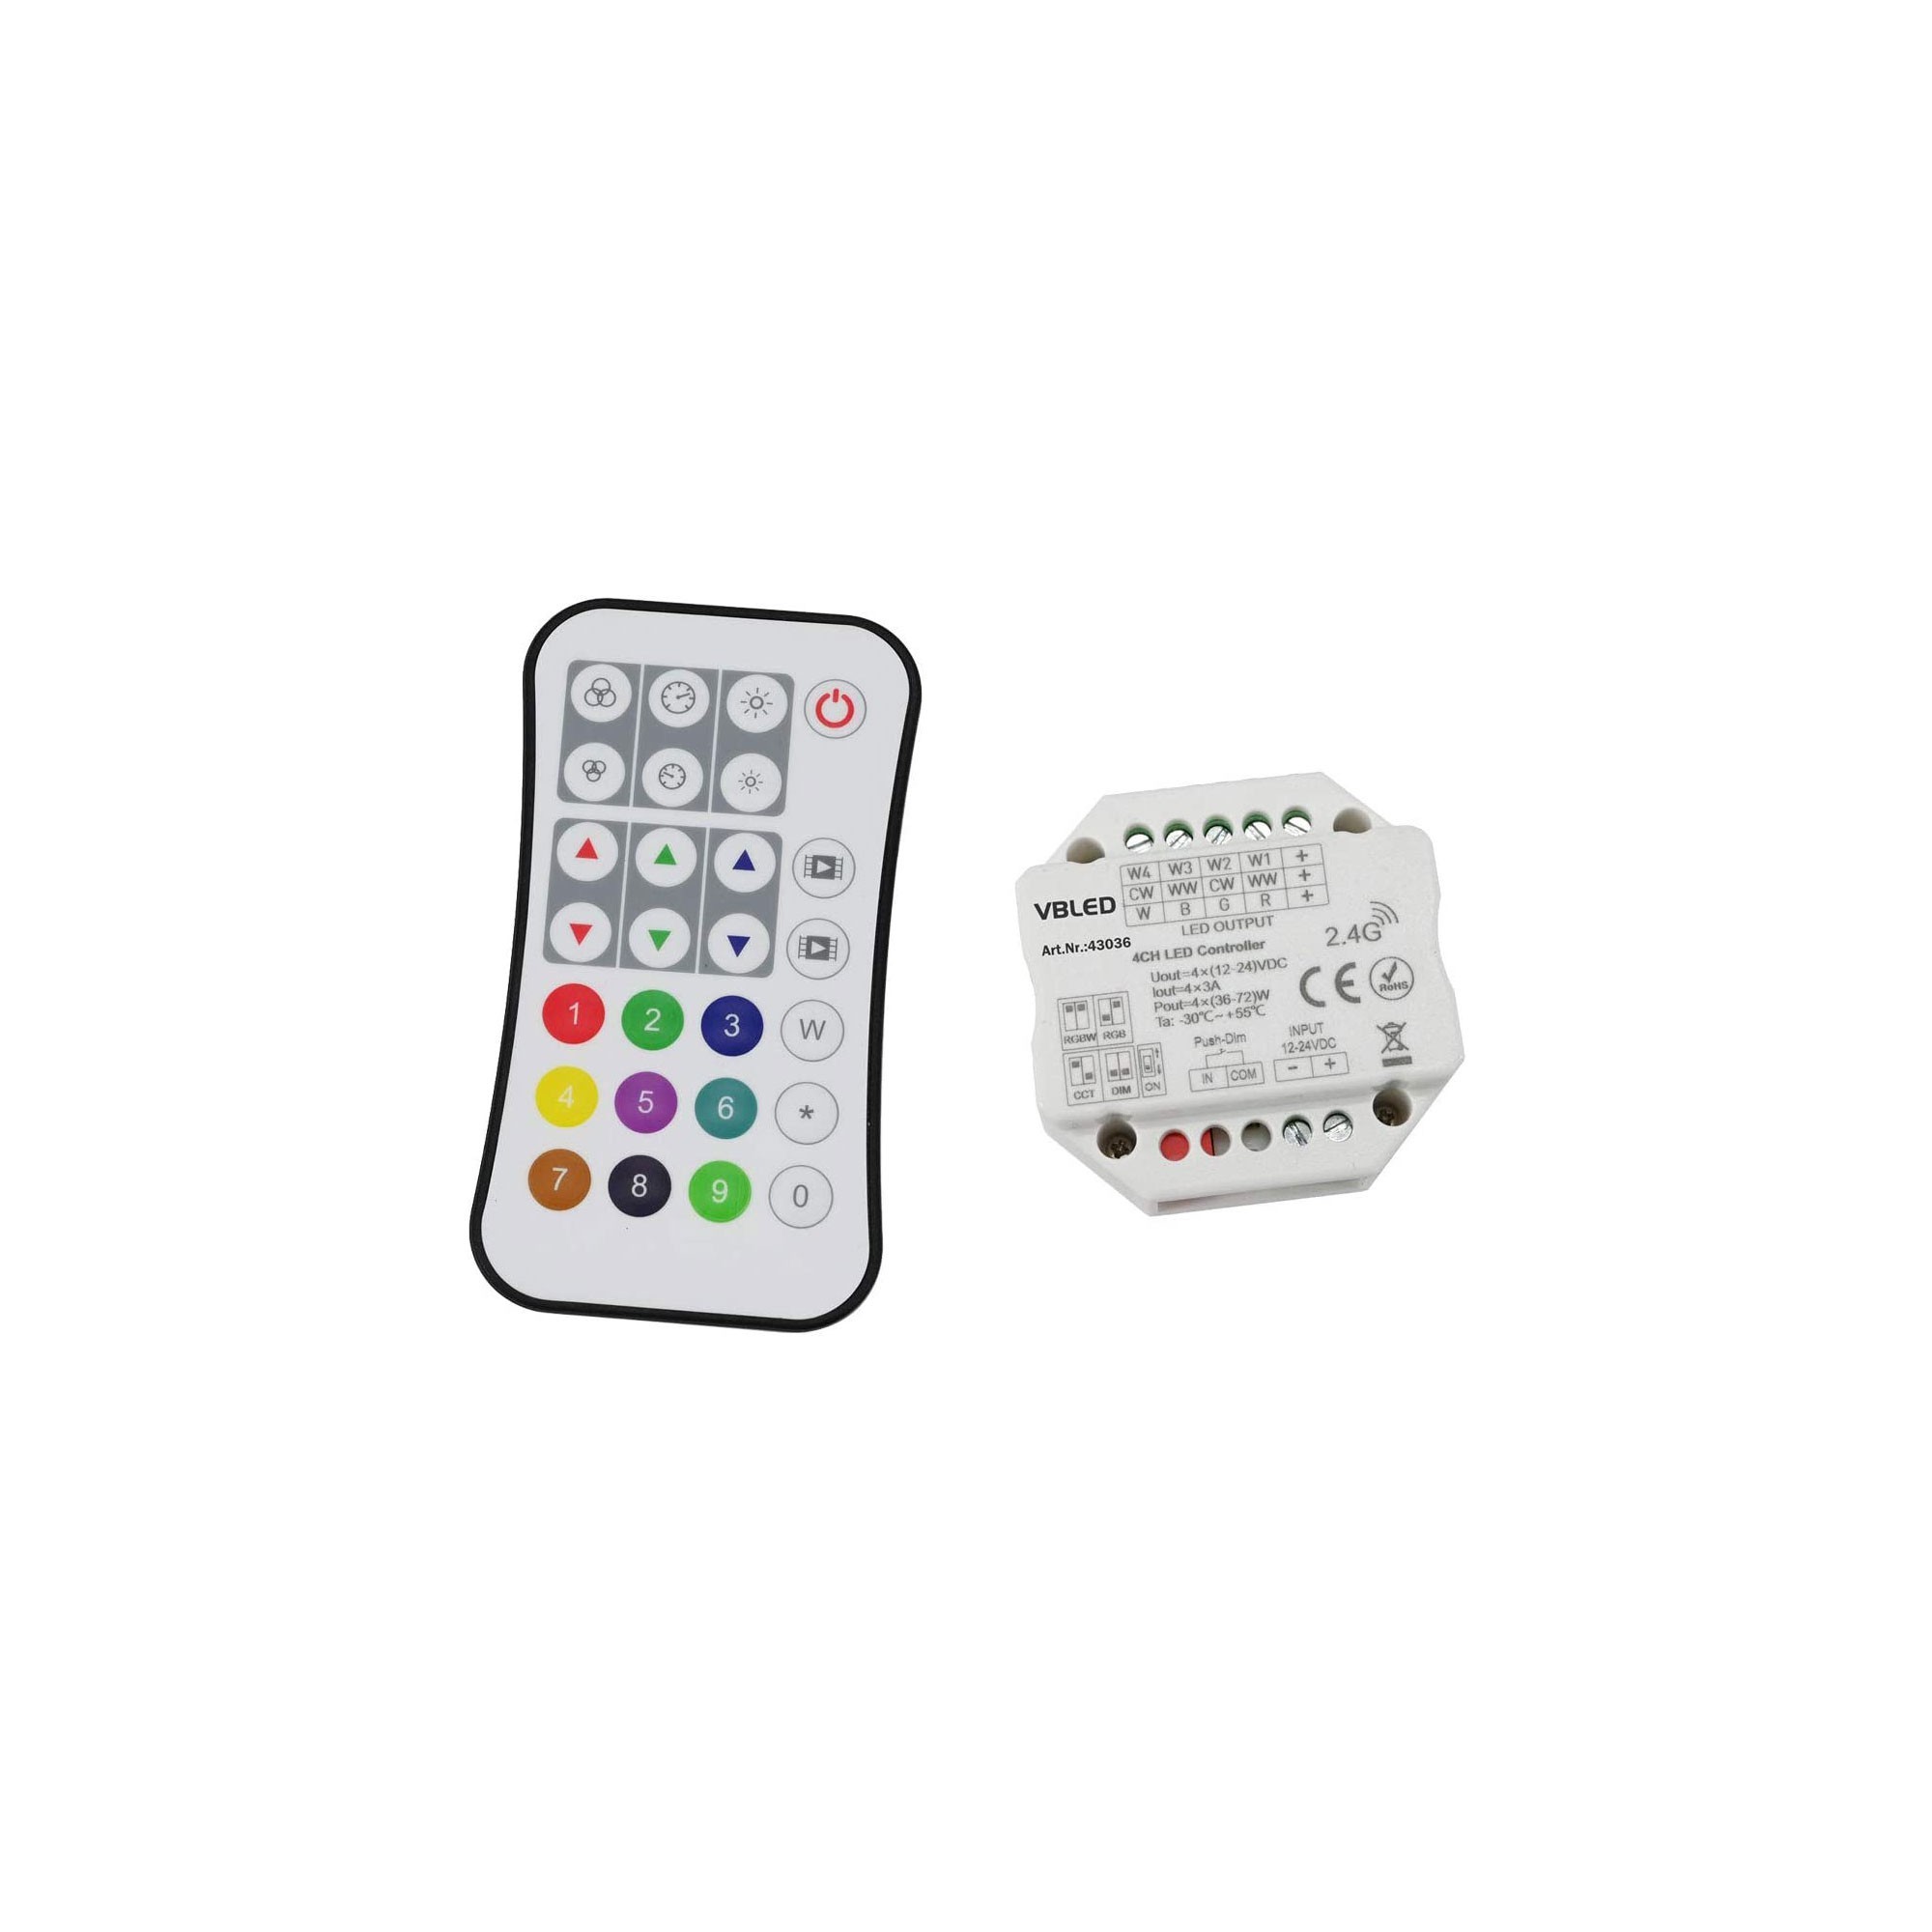 "INATUS" SET - Wireless Dimmer Controller for RGB, or RGB+W LED Strips 12-24V DC